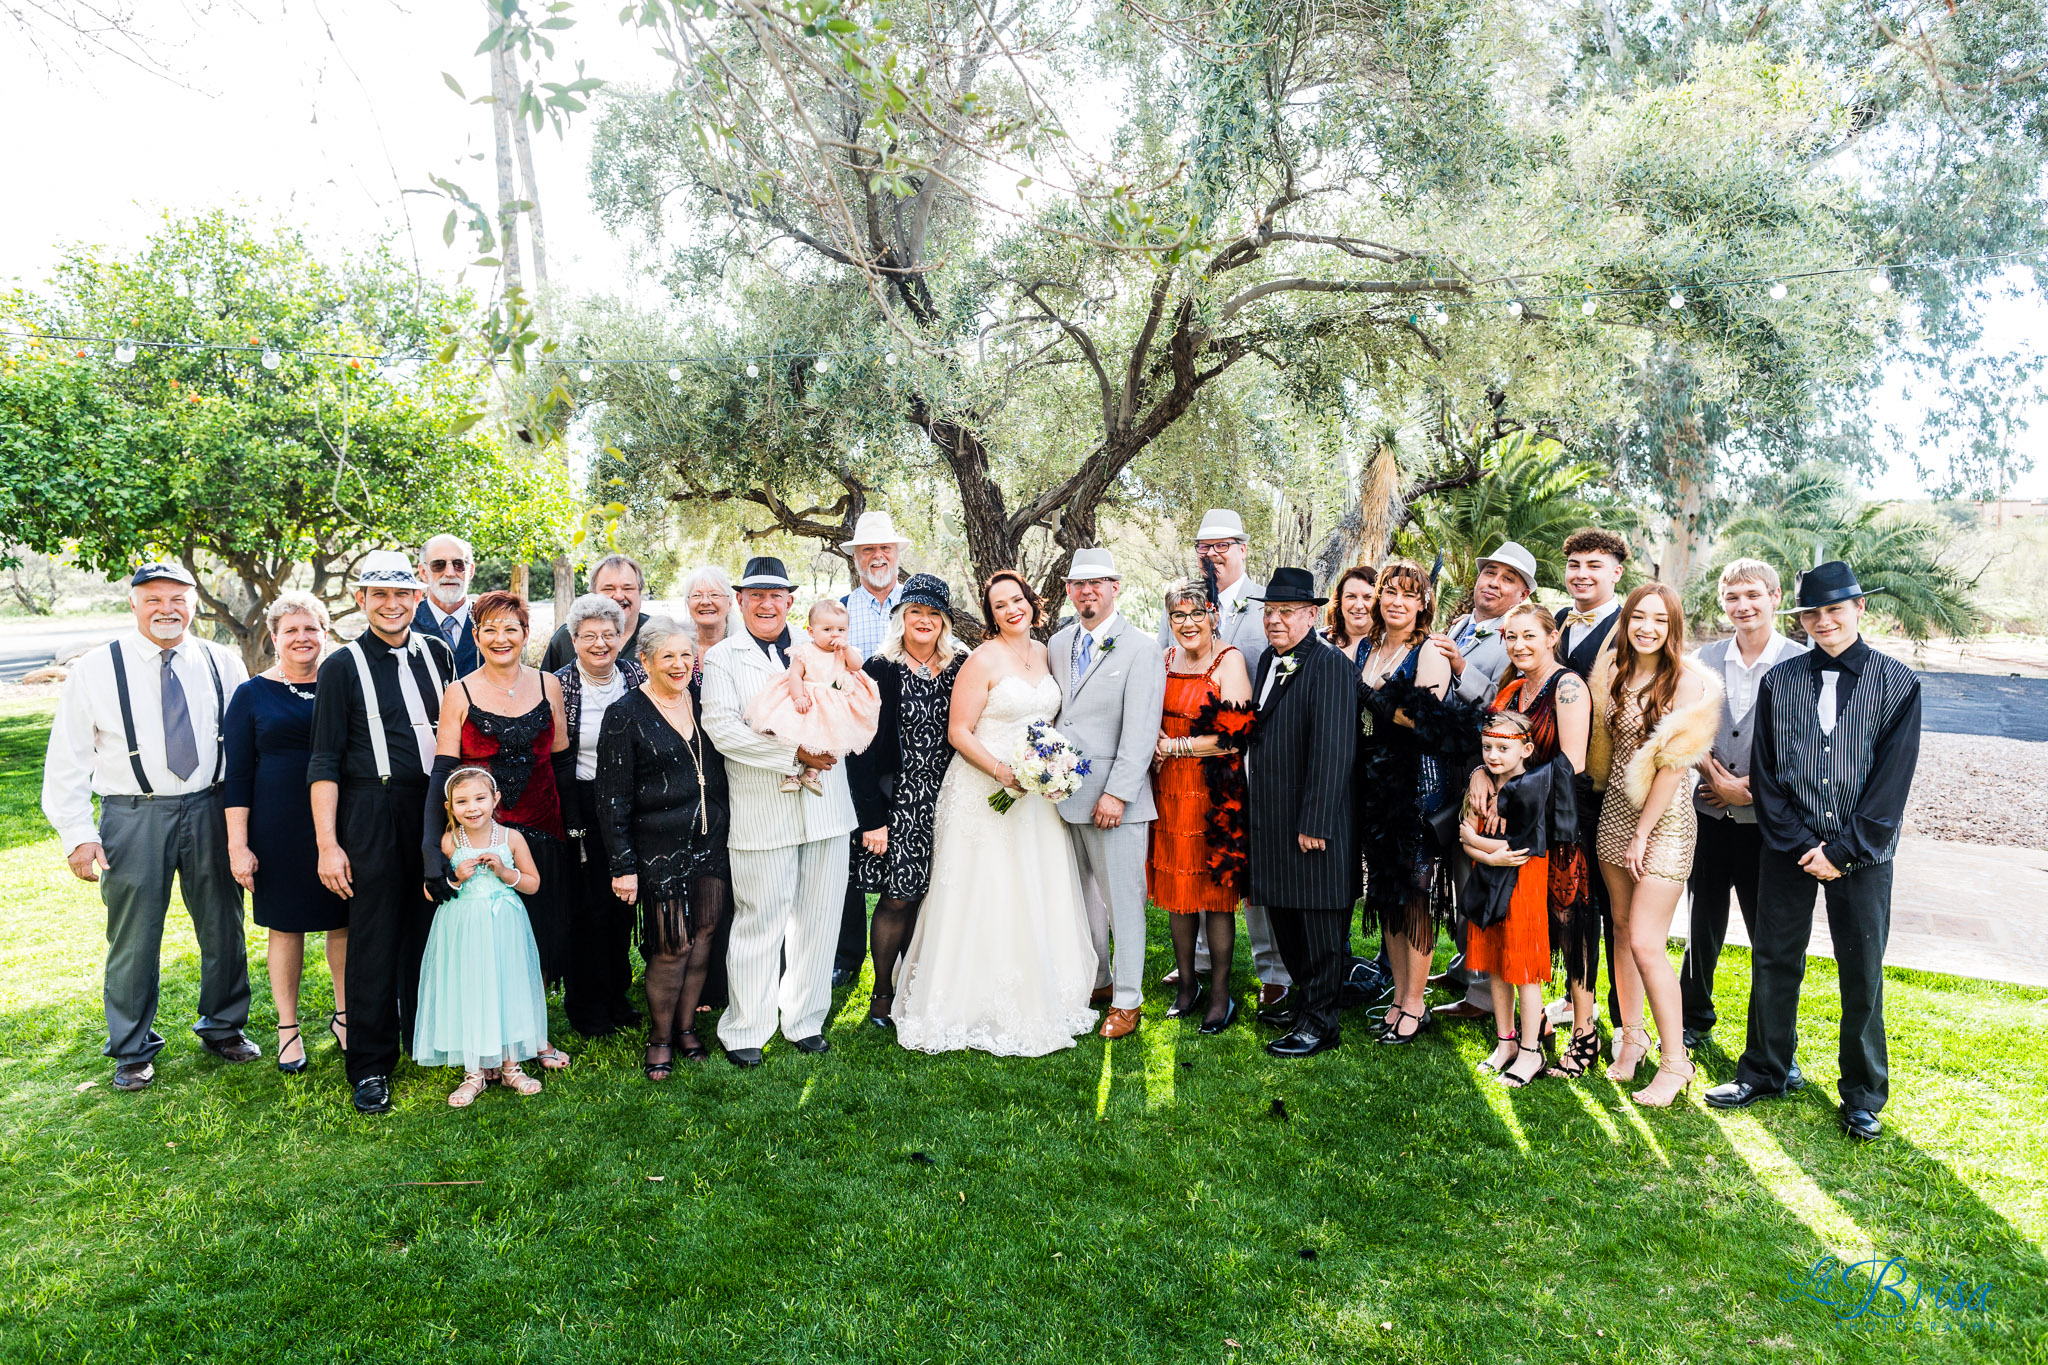 Great Gatsby family formal portrait buttes at reflections wedding